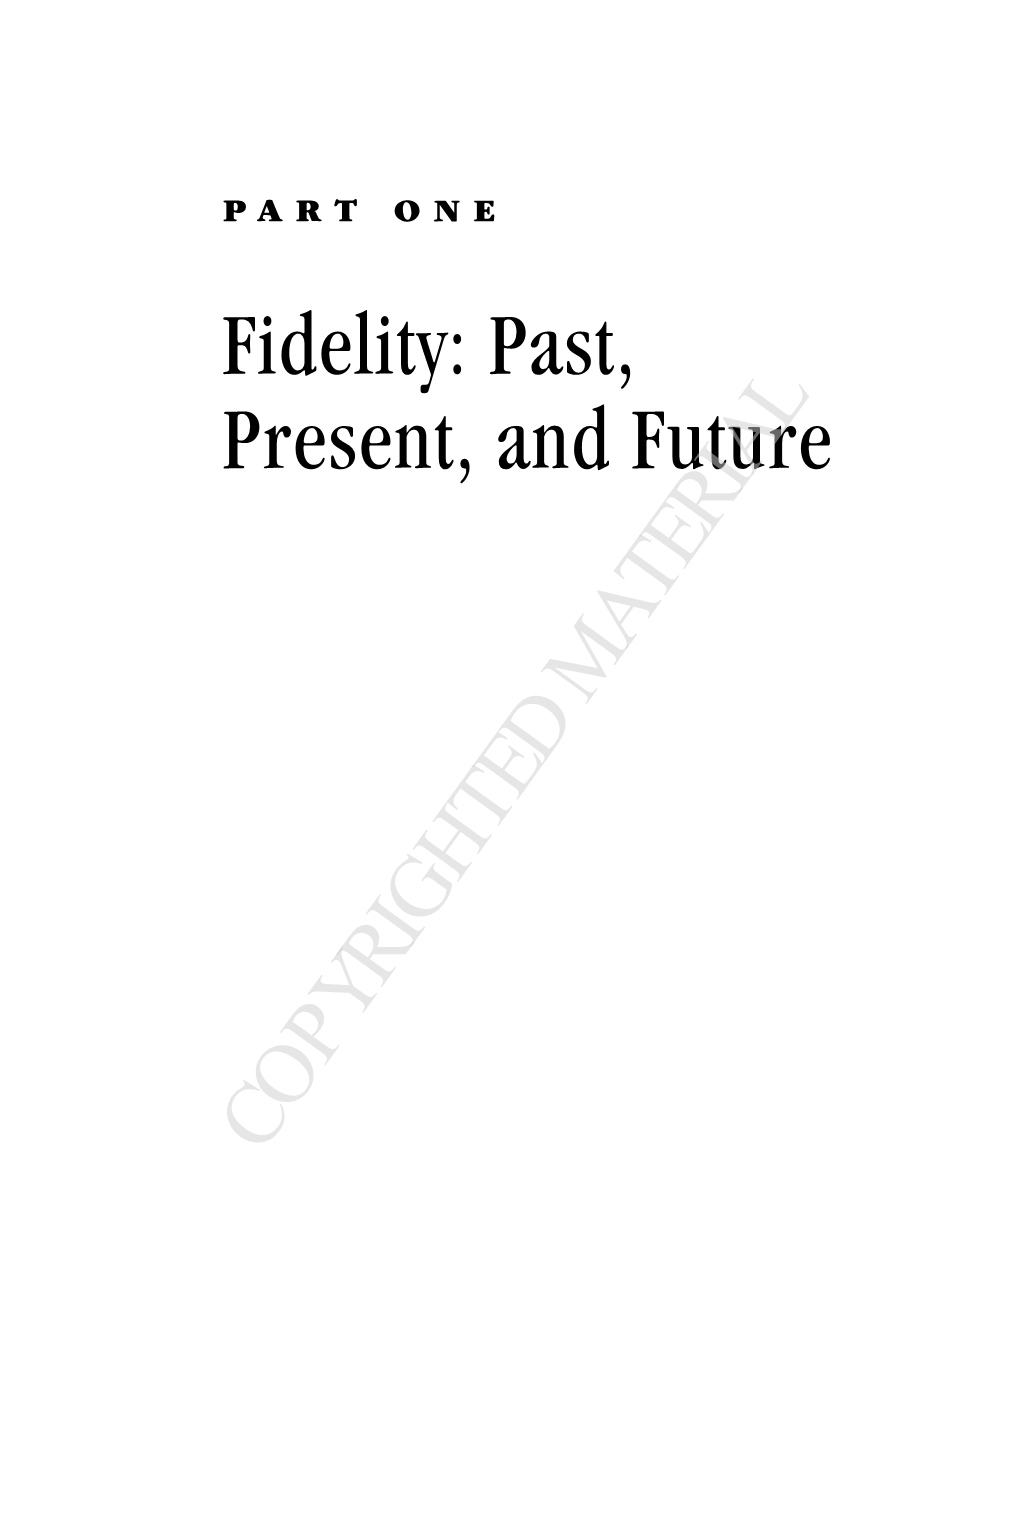 Fidelity: Past, Present, and Future